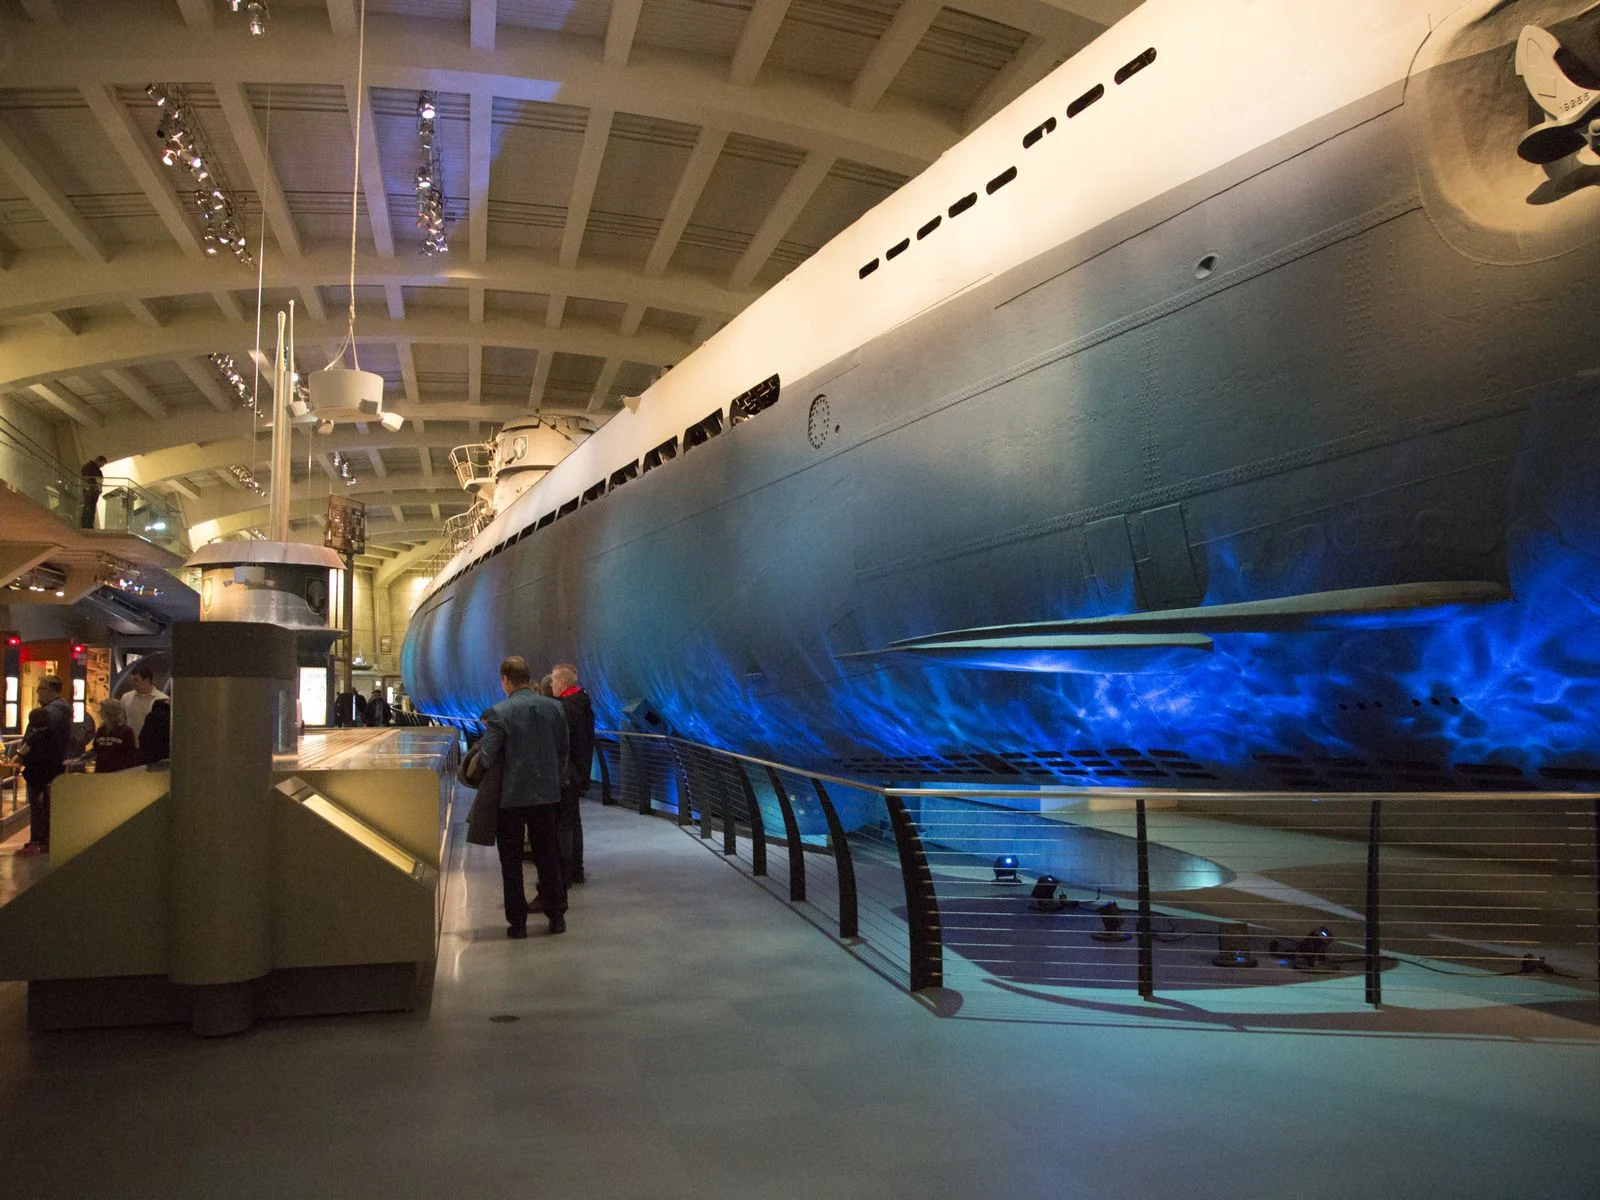 Several adult and kids viewing exhibits at the Main Hall at Museum of Science and Industry in Chicago, one of the best science museums in America, with a large ship lit with blue lamp to imitate the waves 